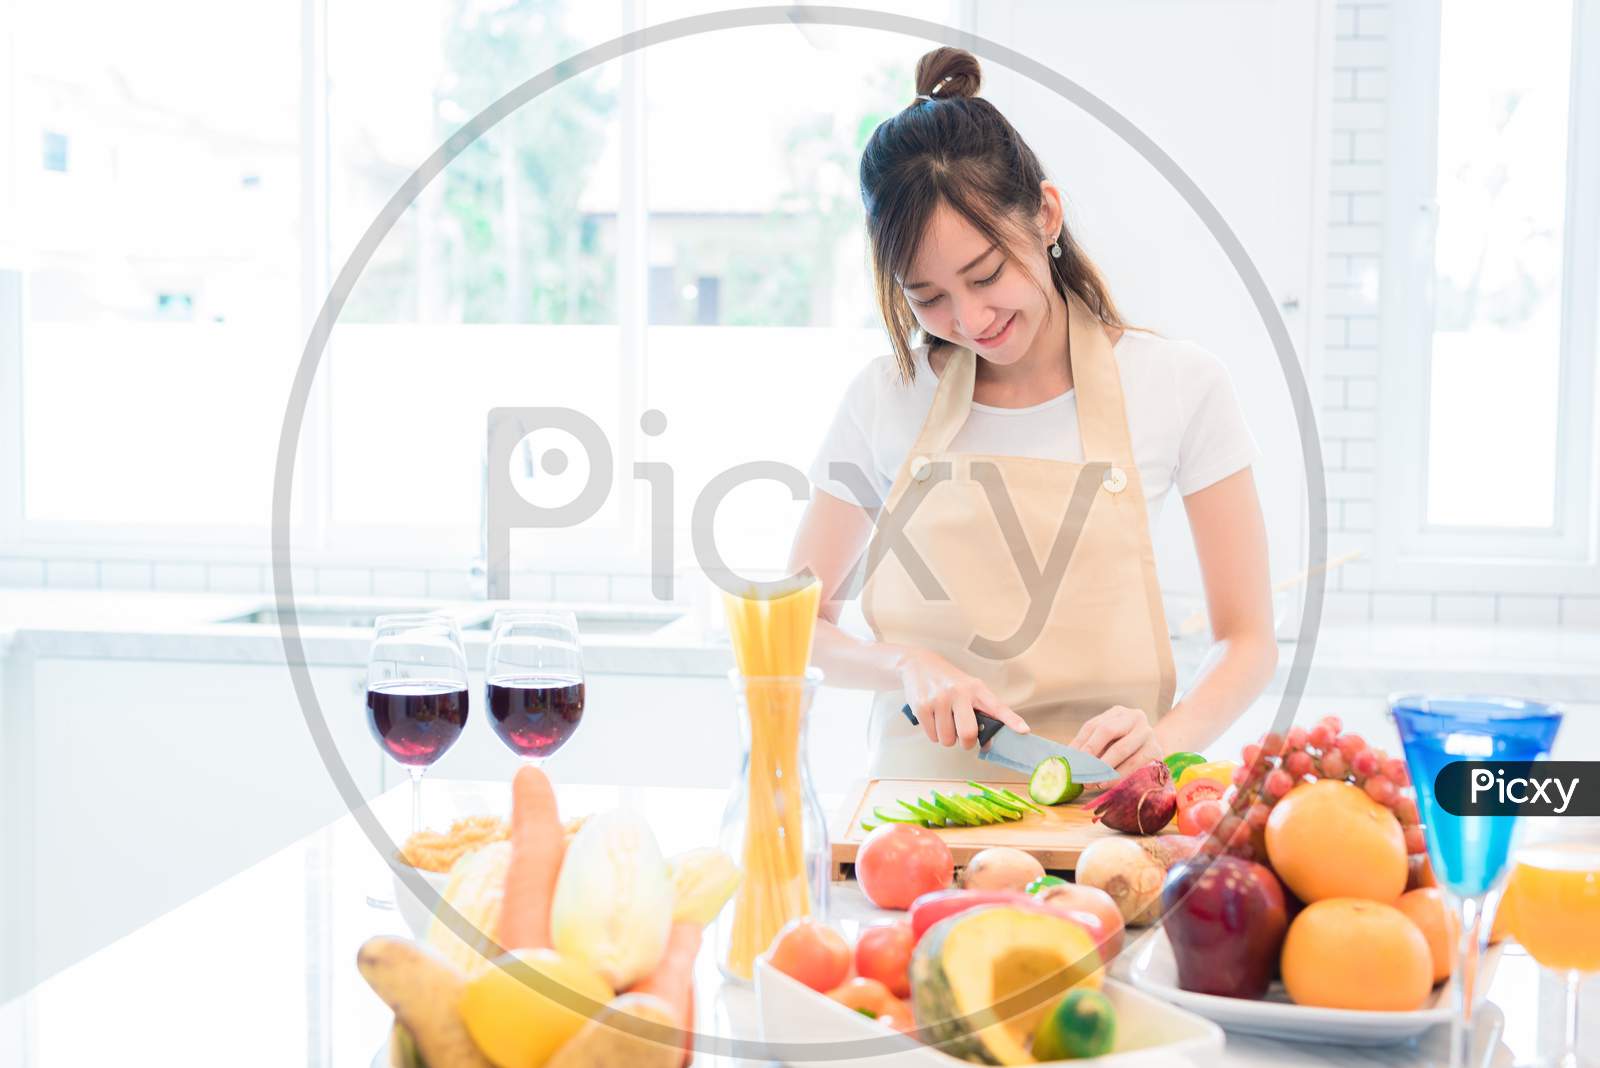 Woman Cooking And Slicing Vegetable In Kitchen Room With Full Of Food And Fruit On Table. Holiday And Happiness Concept.